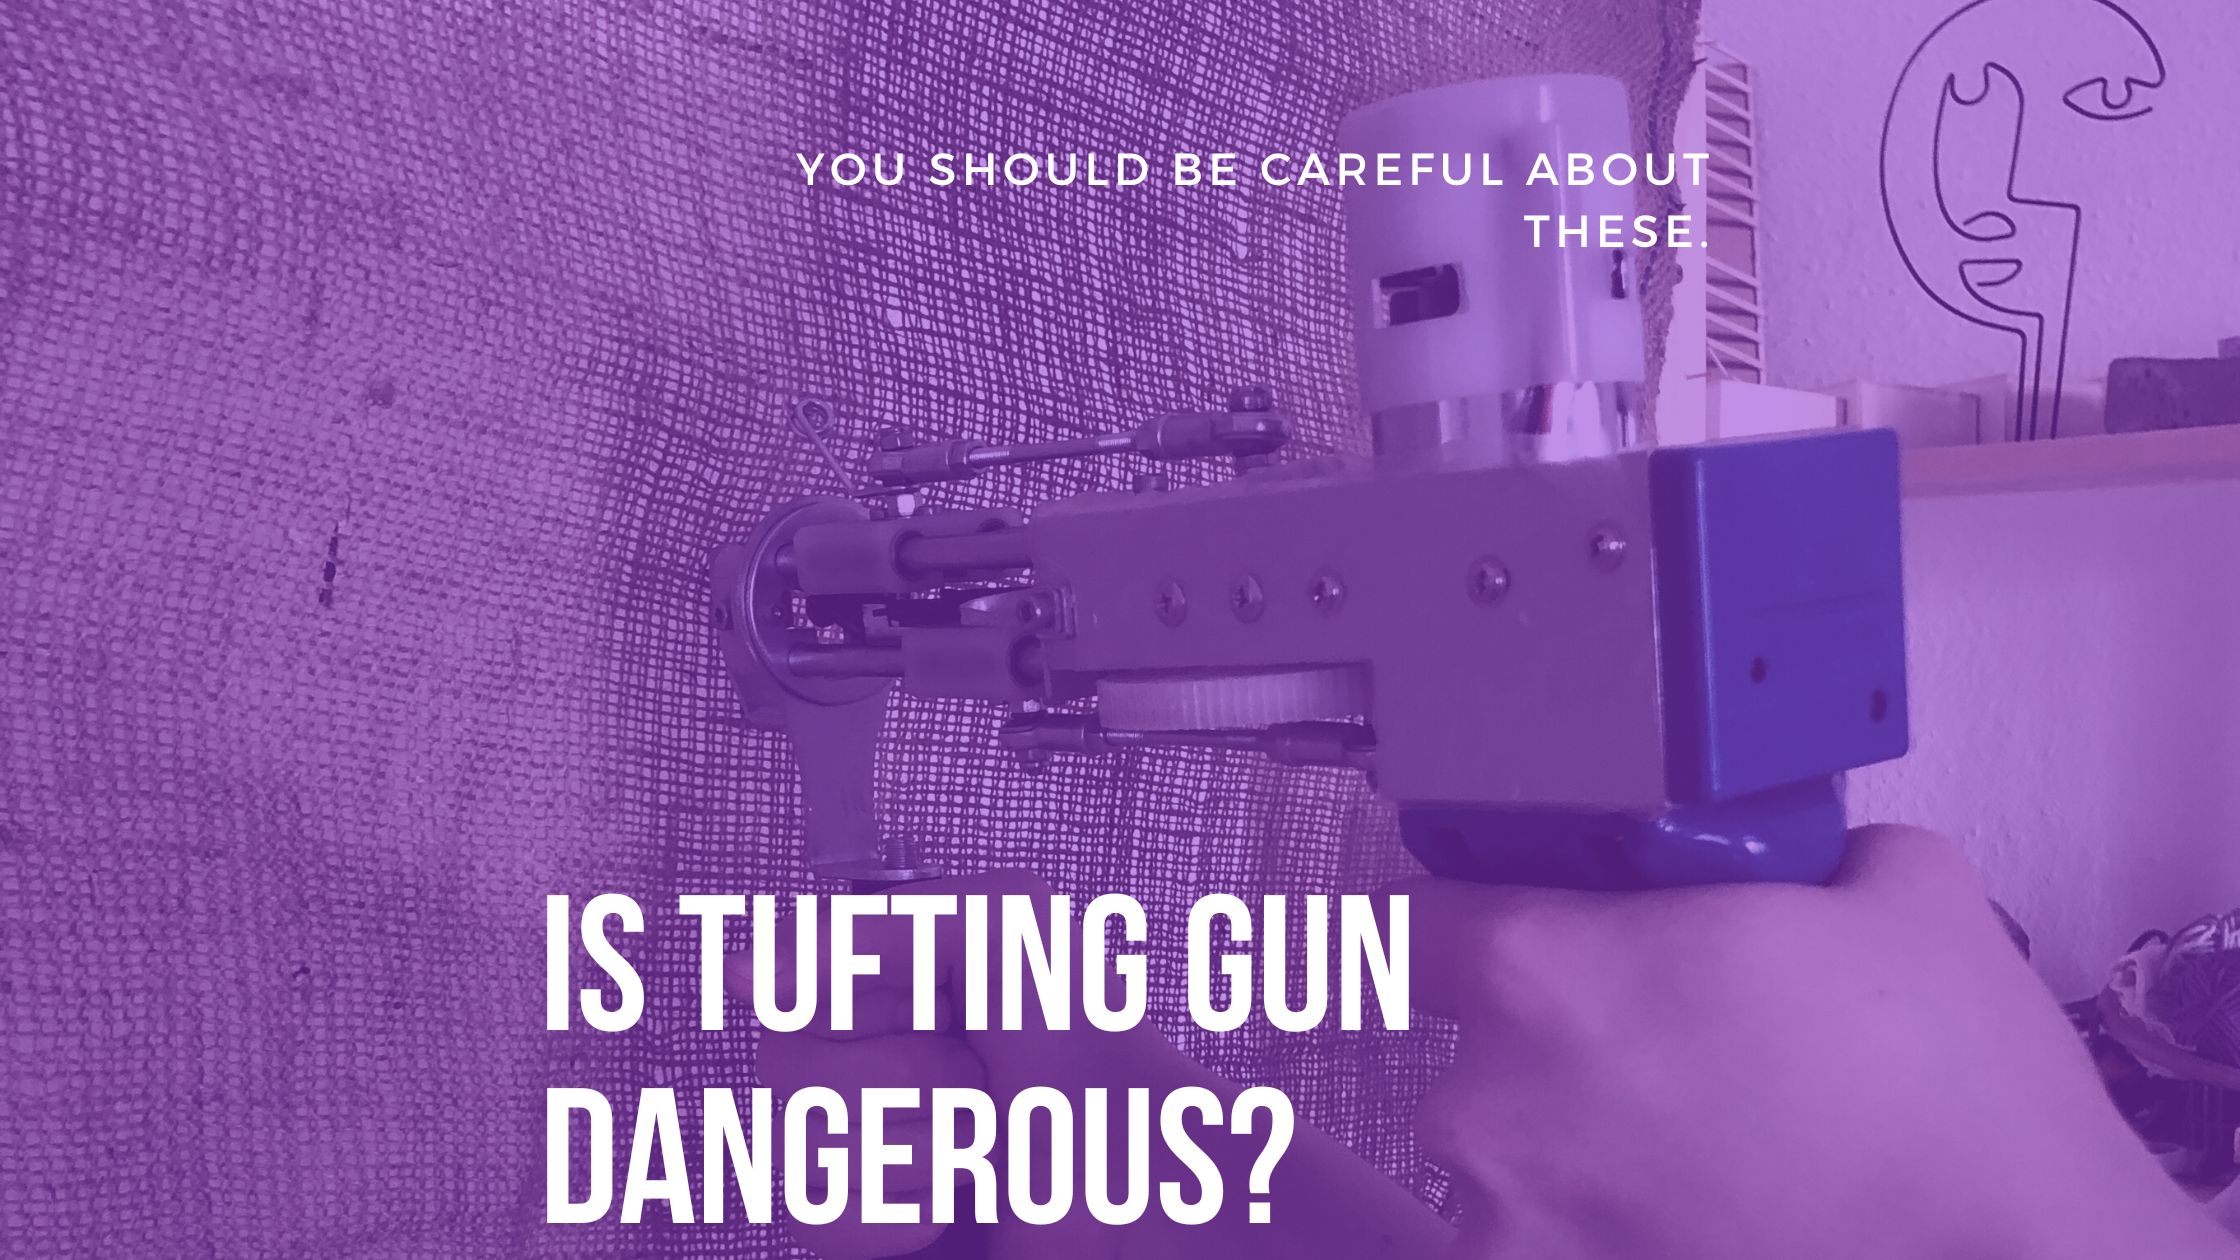 Is tufting gun dangerous? You should be careful about these.